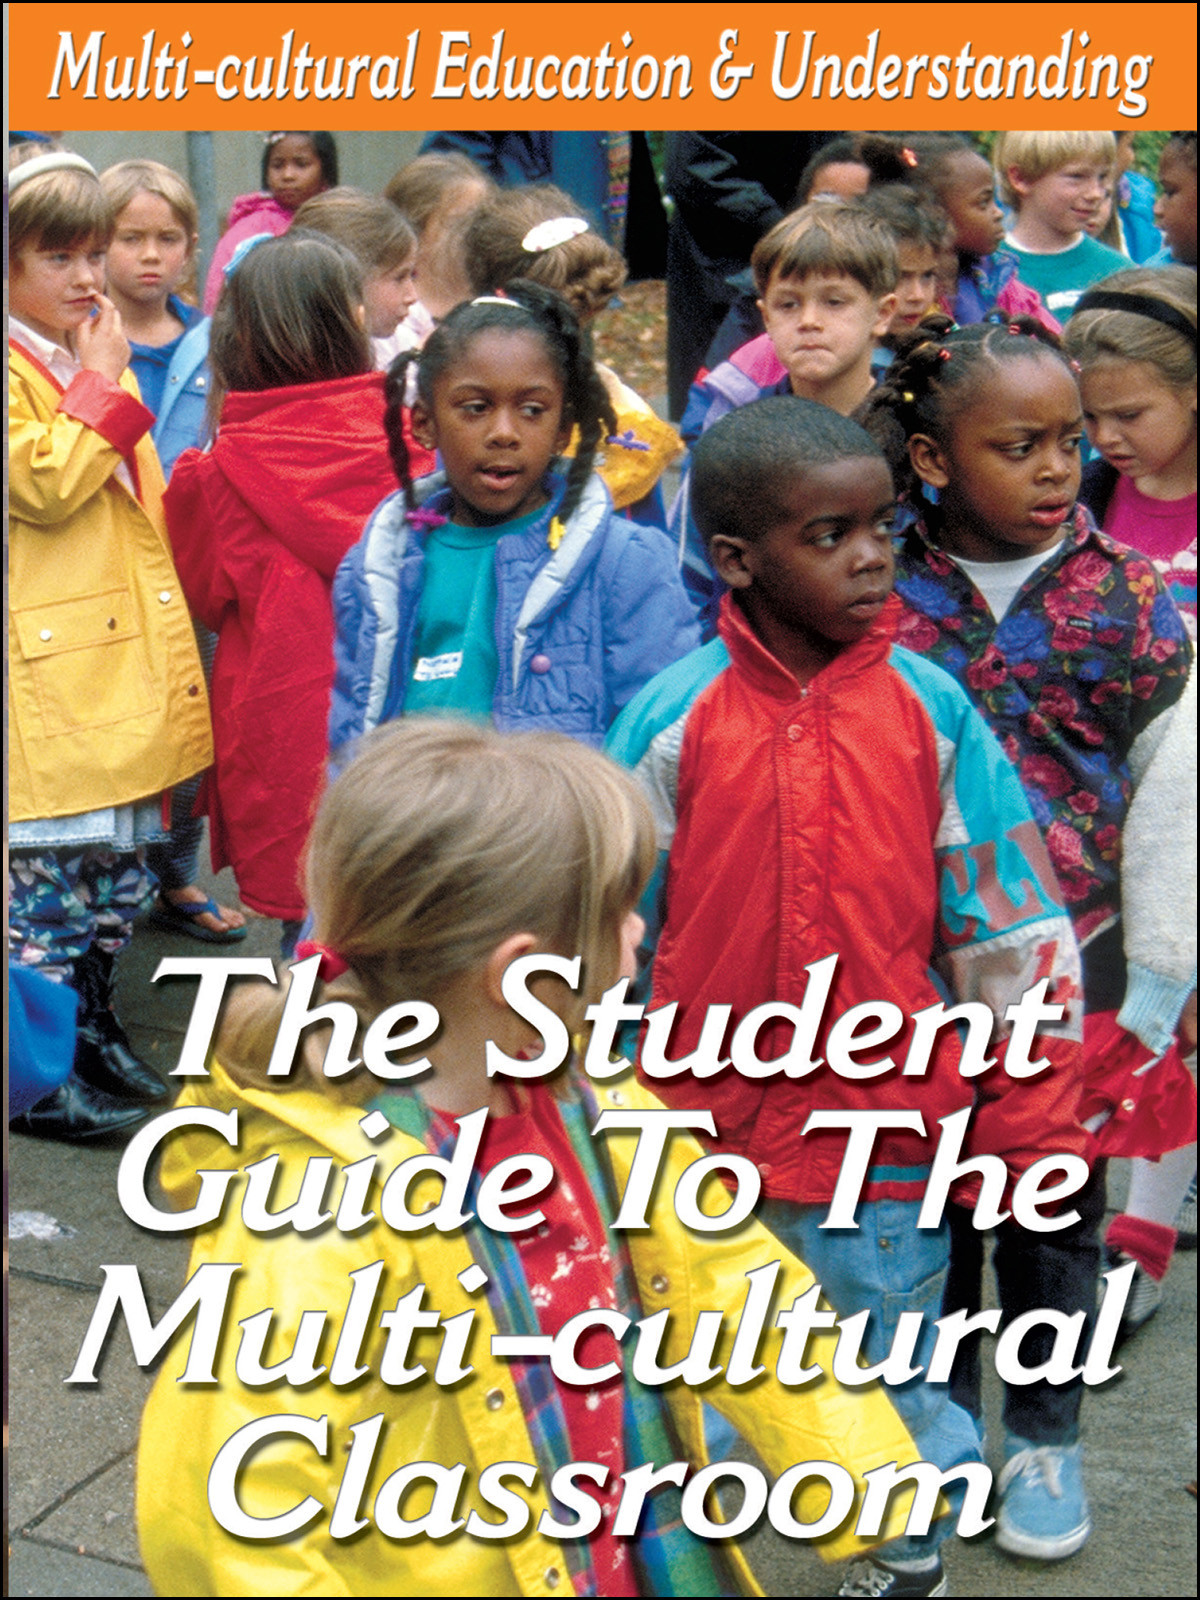 L929 - The Student Guide To The Ethnic Diversity in the Multi-cultural Classroom